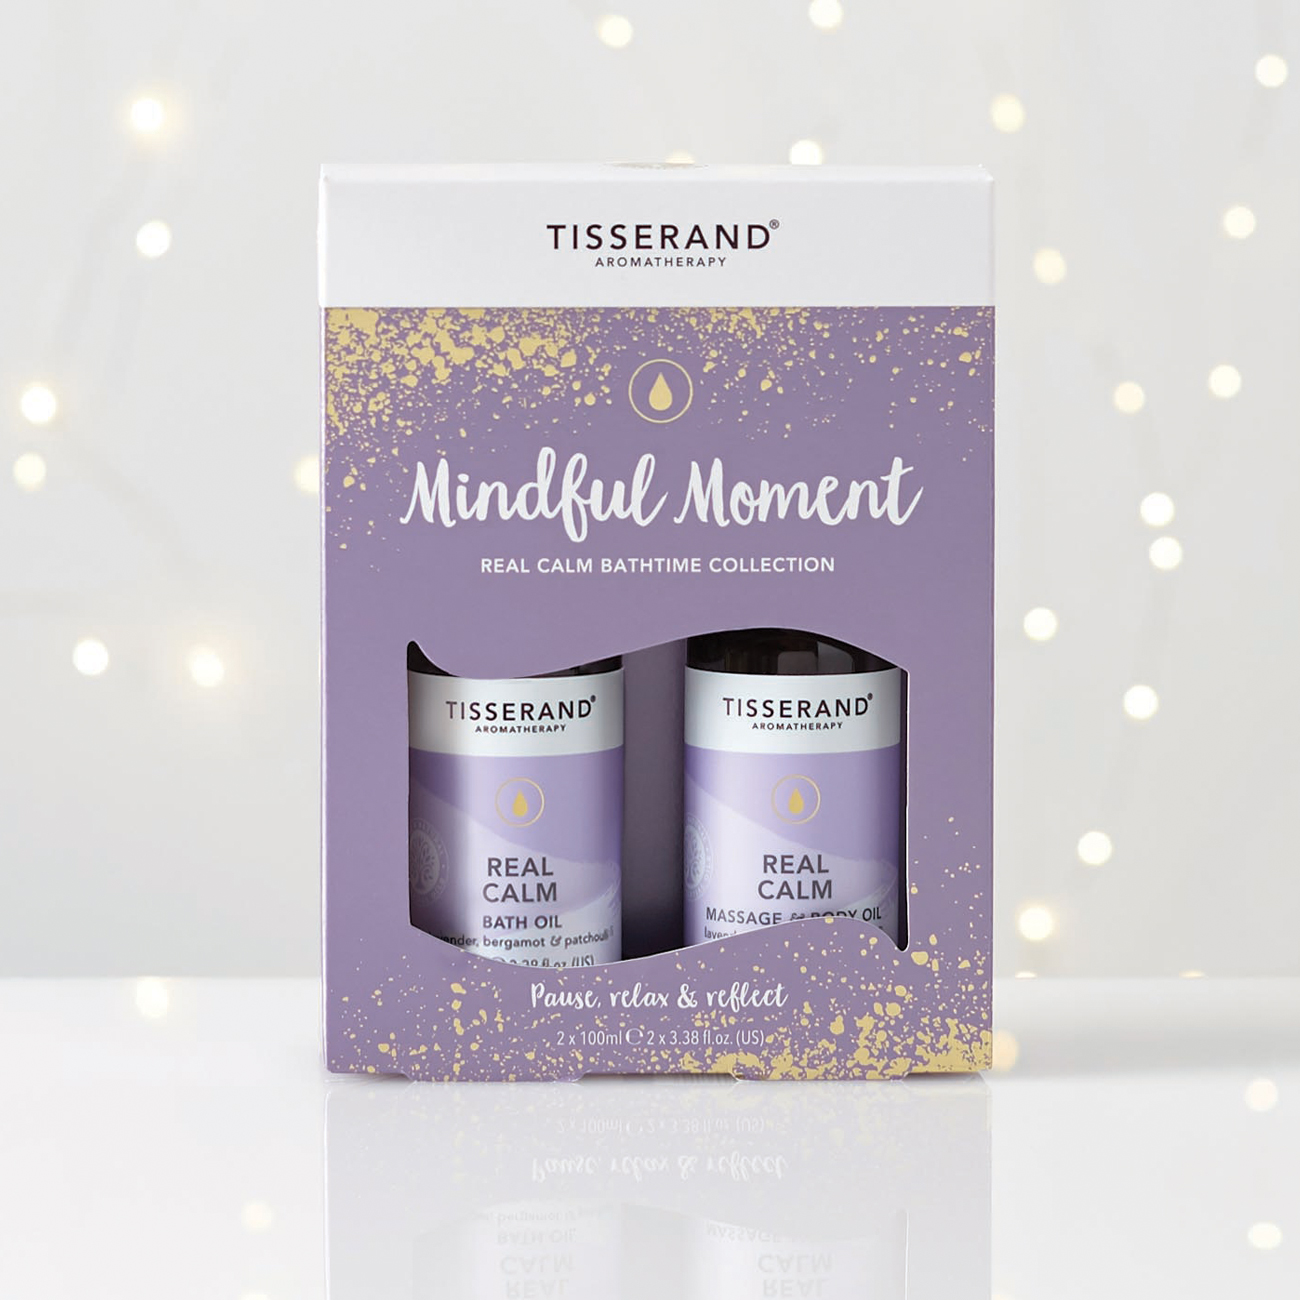 Tisserand - Mindful Moment Bathtime Collection (Real Calm)